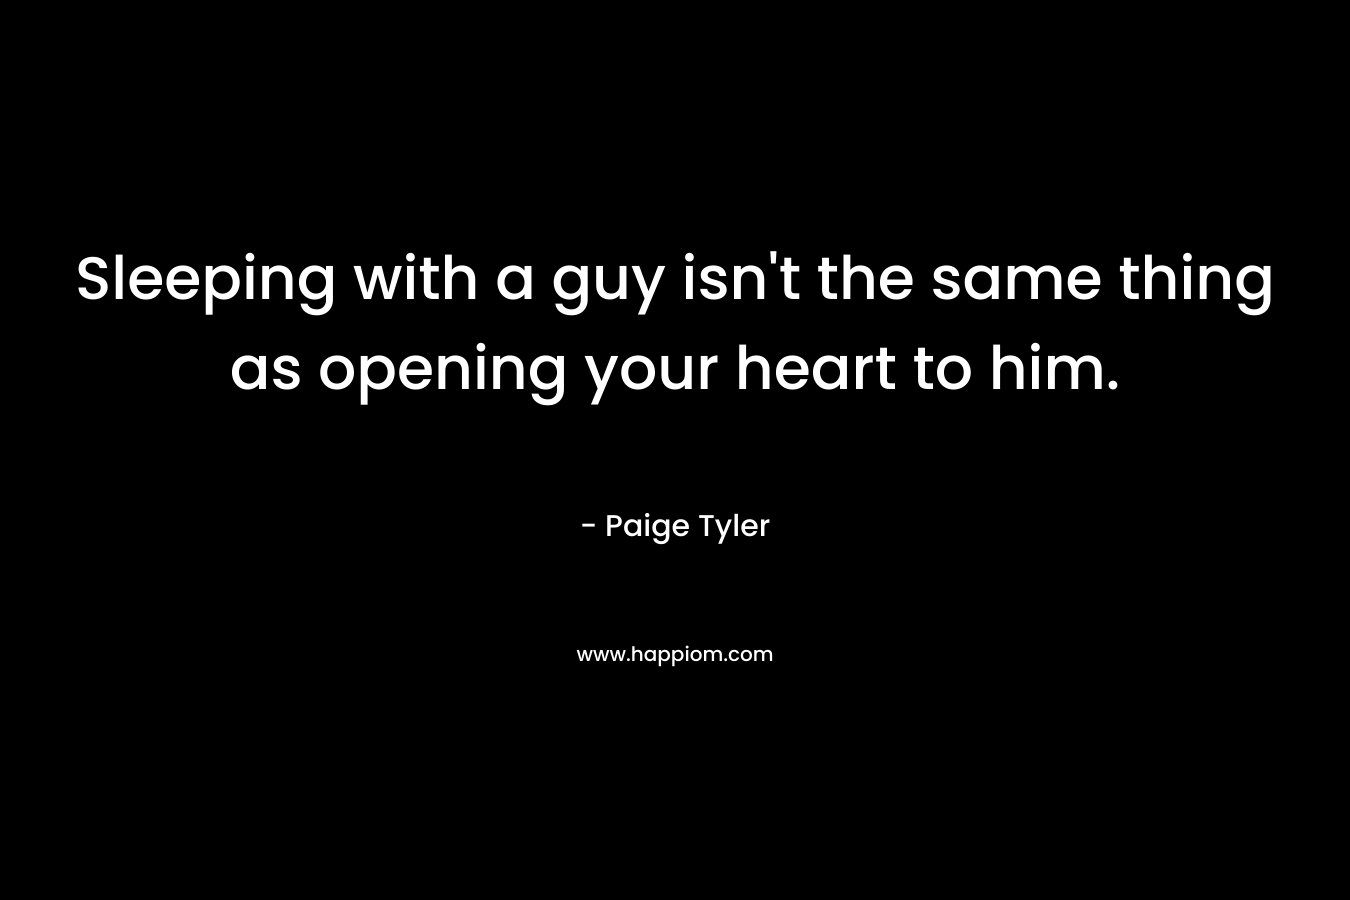 Sleeping with a guy isn't the same thing as opening your heart to him.